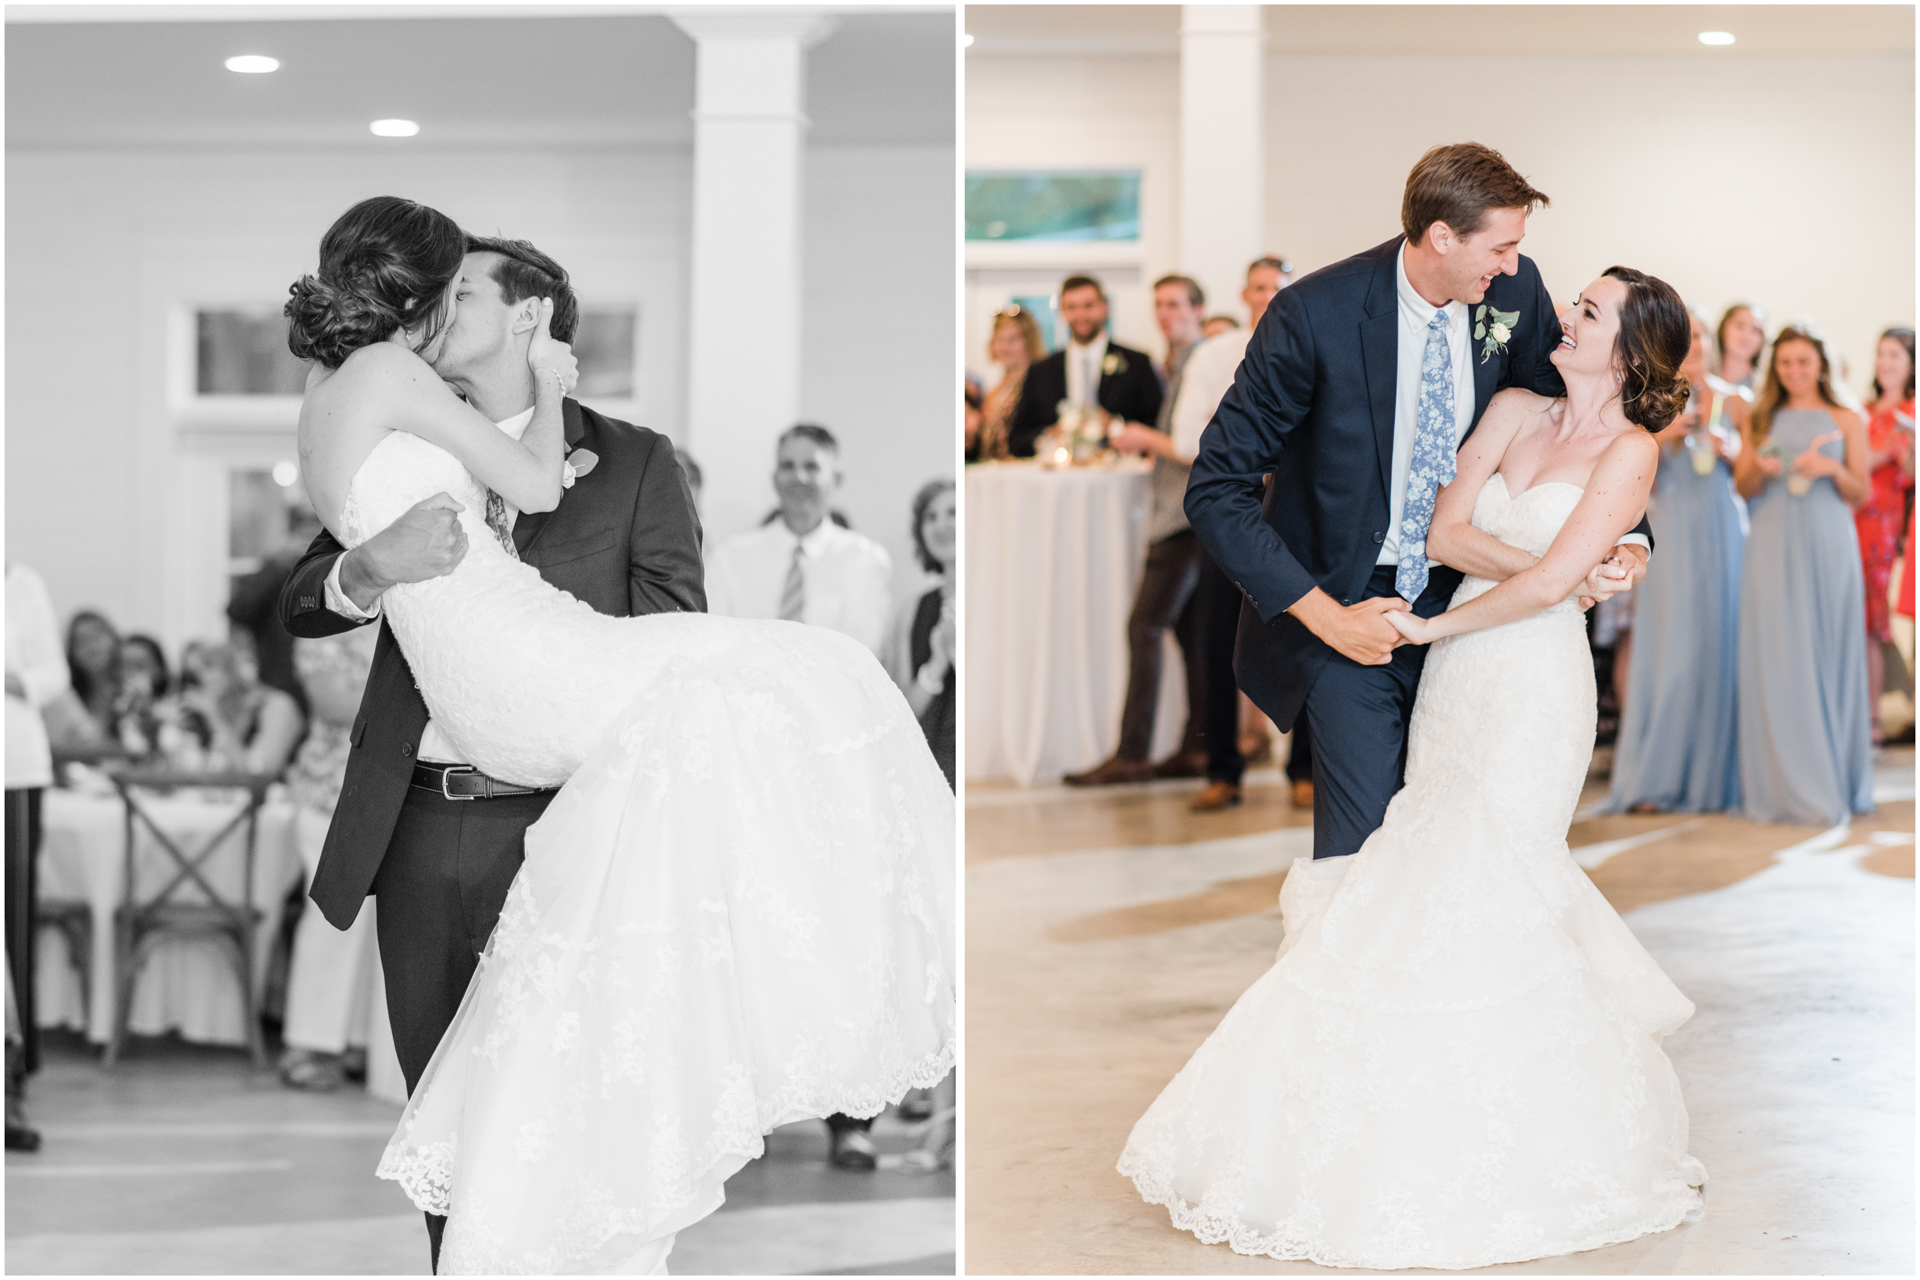 Bride and Groom First Dance during Reception - Picks her up for a kiss - White Barn Wedding